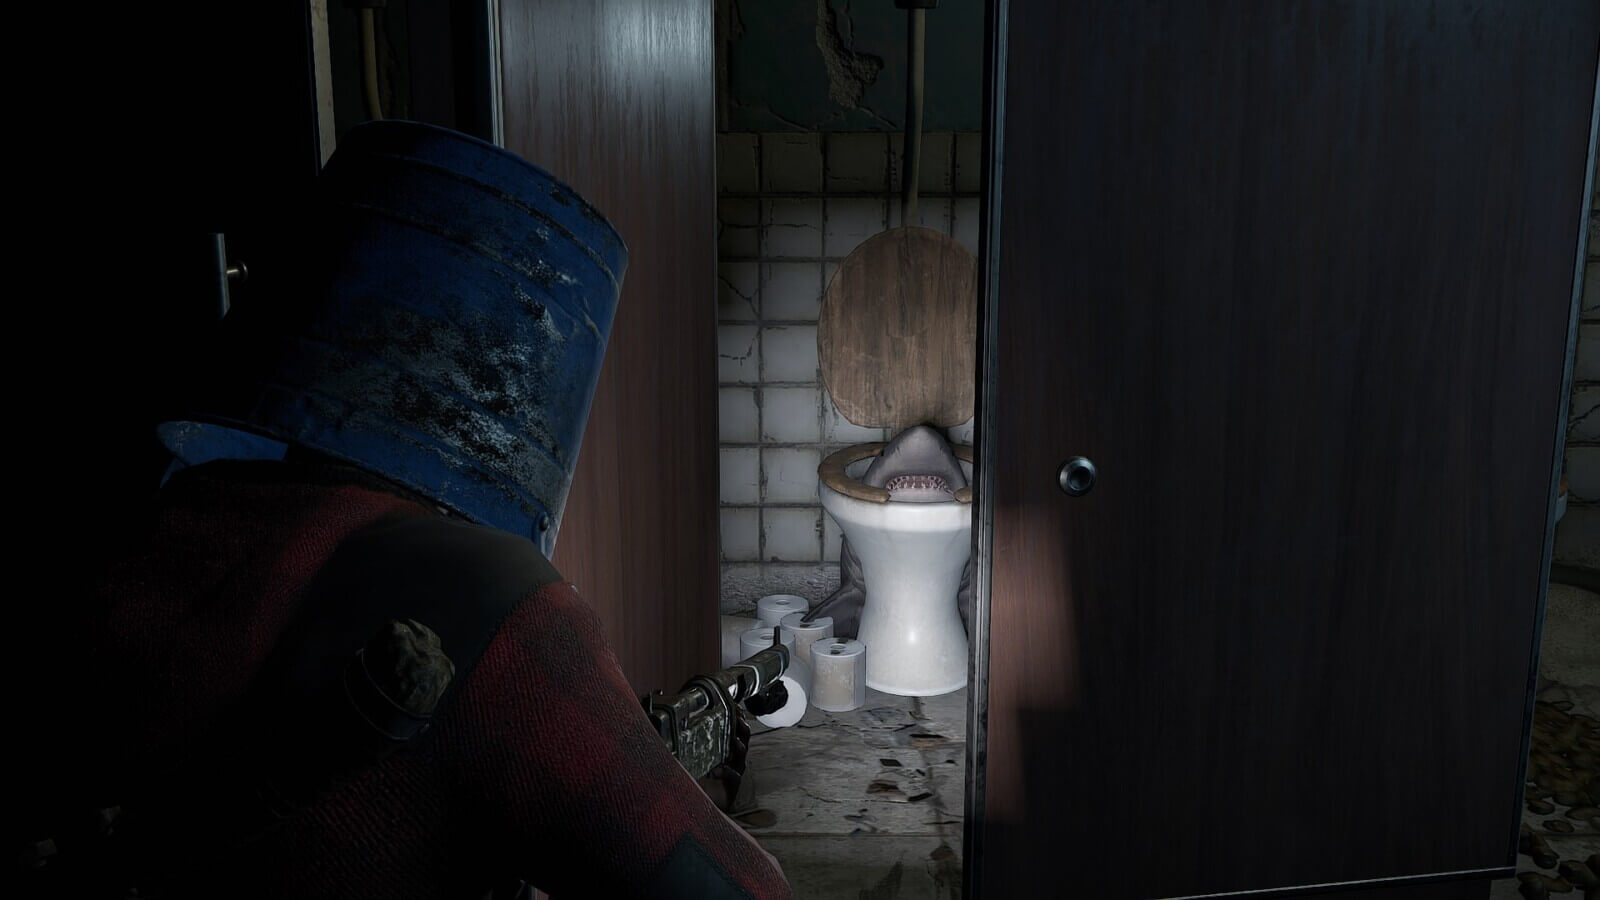 Located in the southern sewers monument on observer island you'll find a very odd shark head in the toilet within the bathroom inside of this monument.